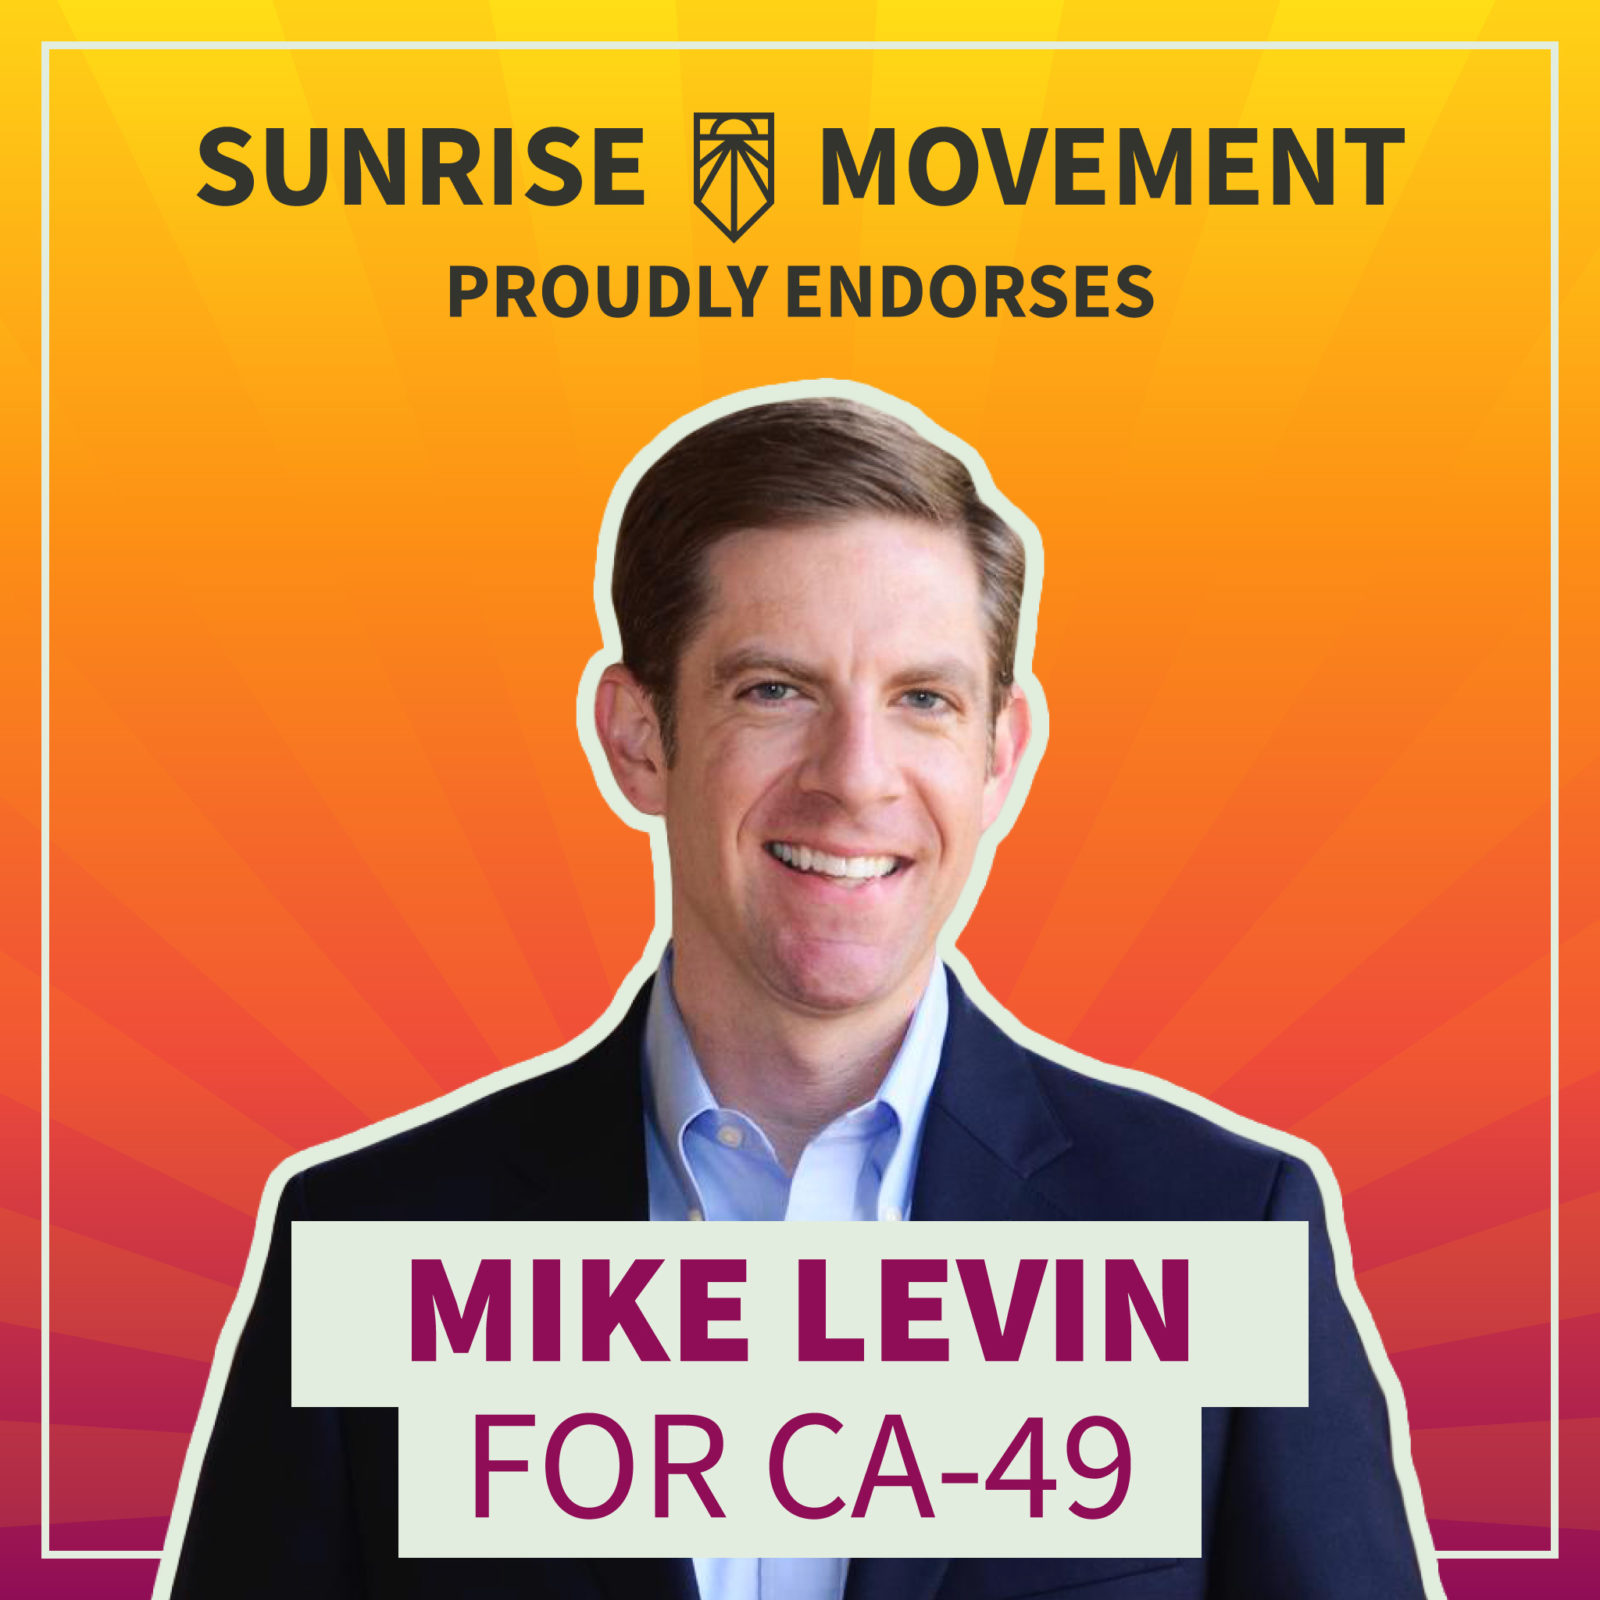 A photo of Mike Levin with text: Sunrise Movement proudly endorses Mike Levin for CA-49